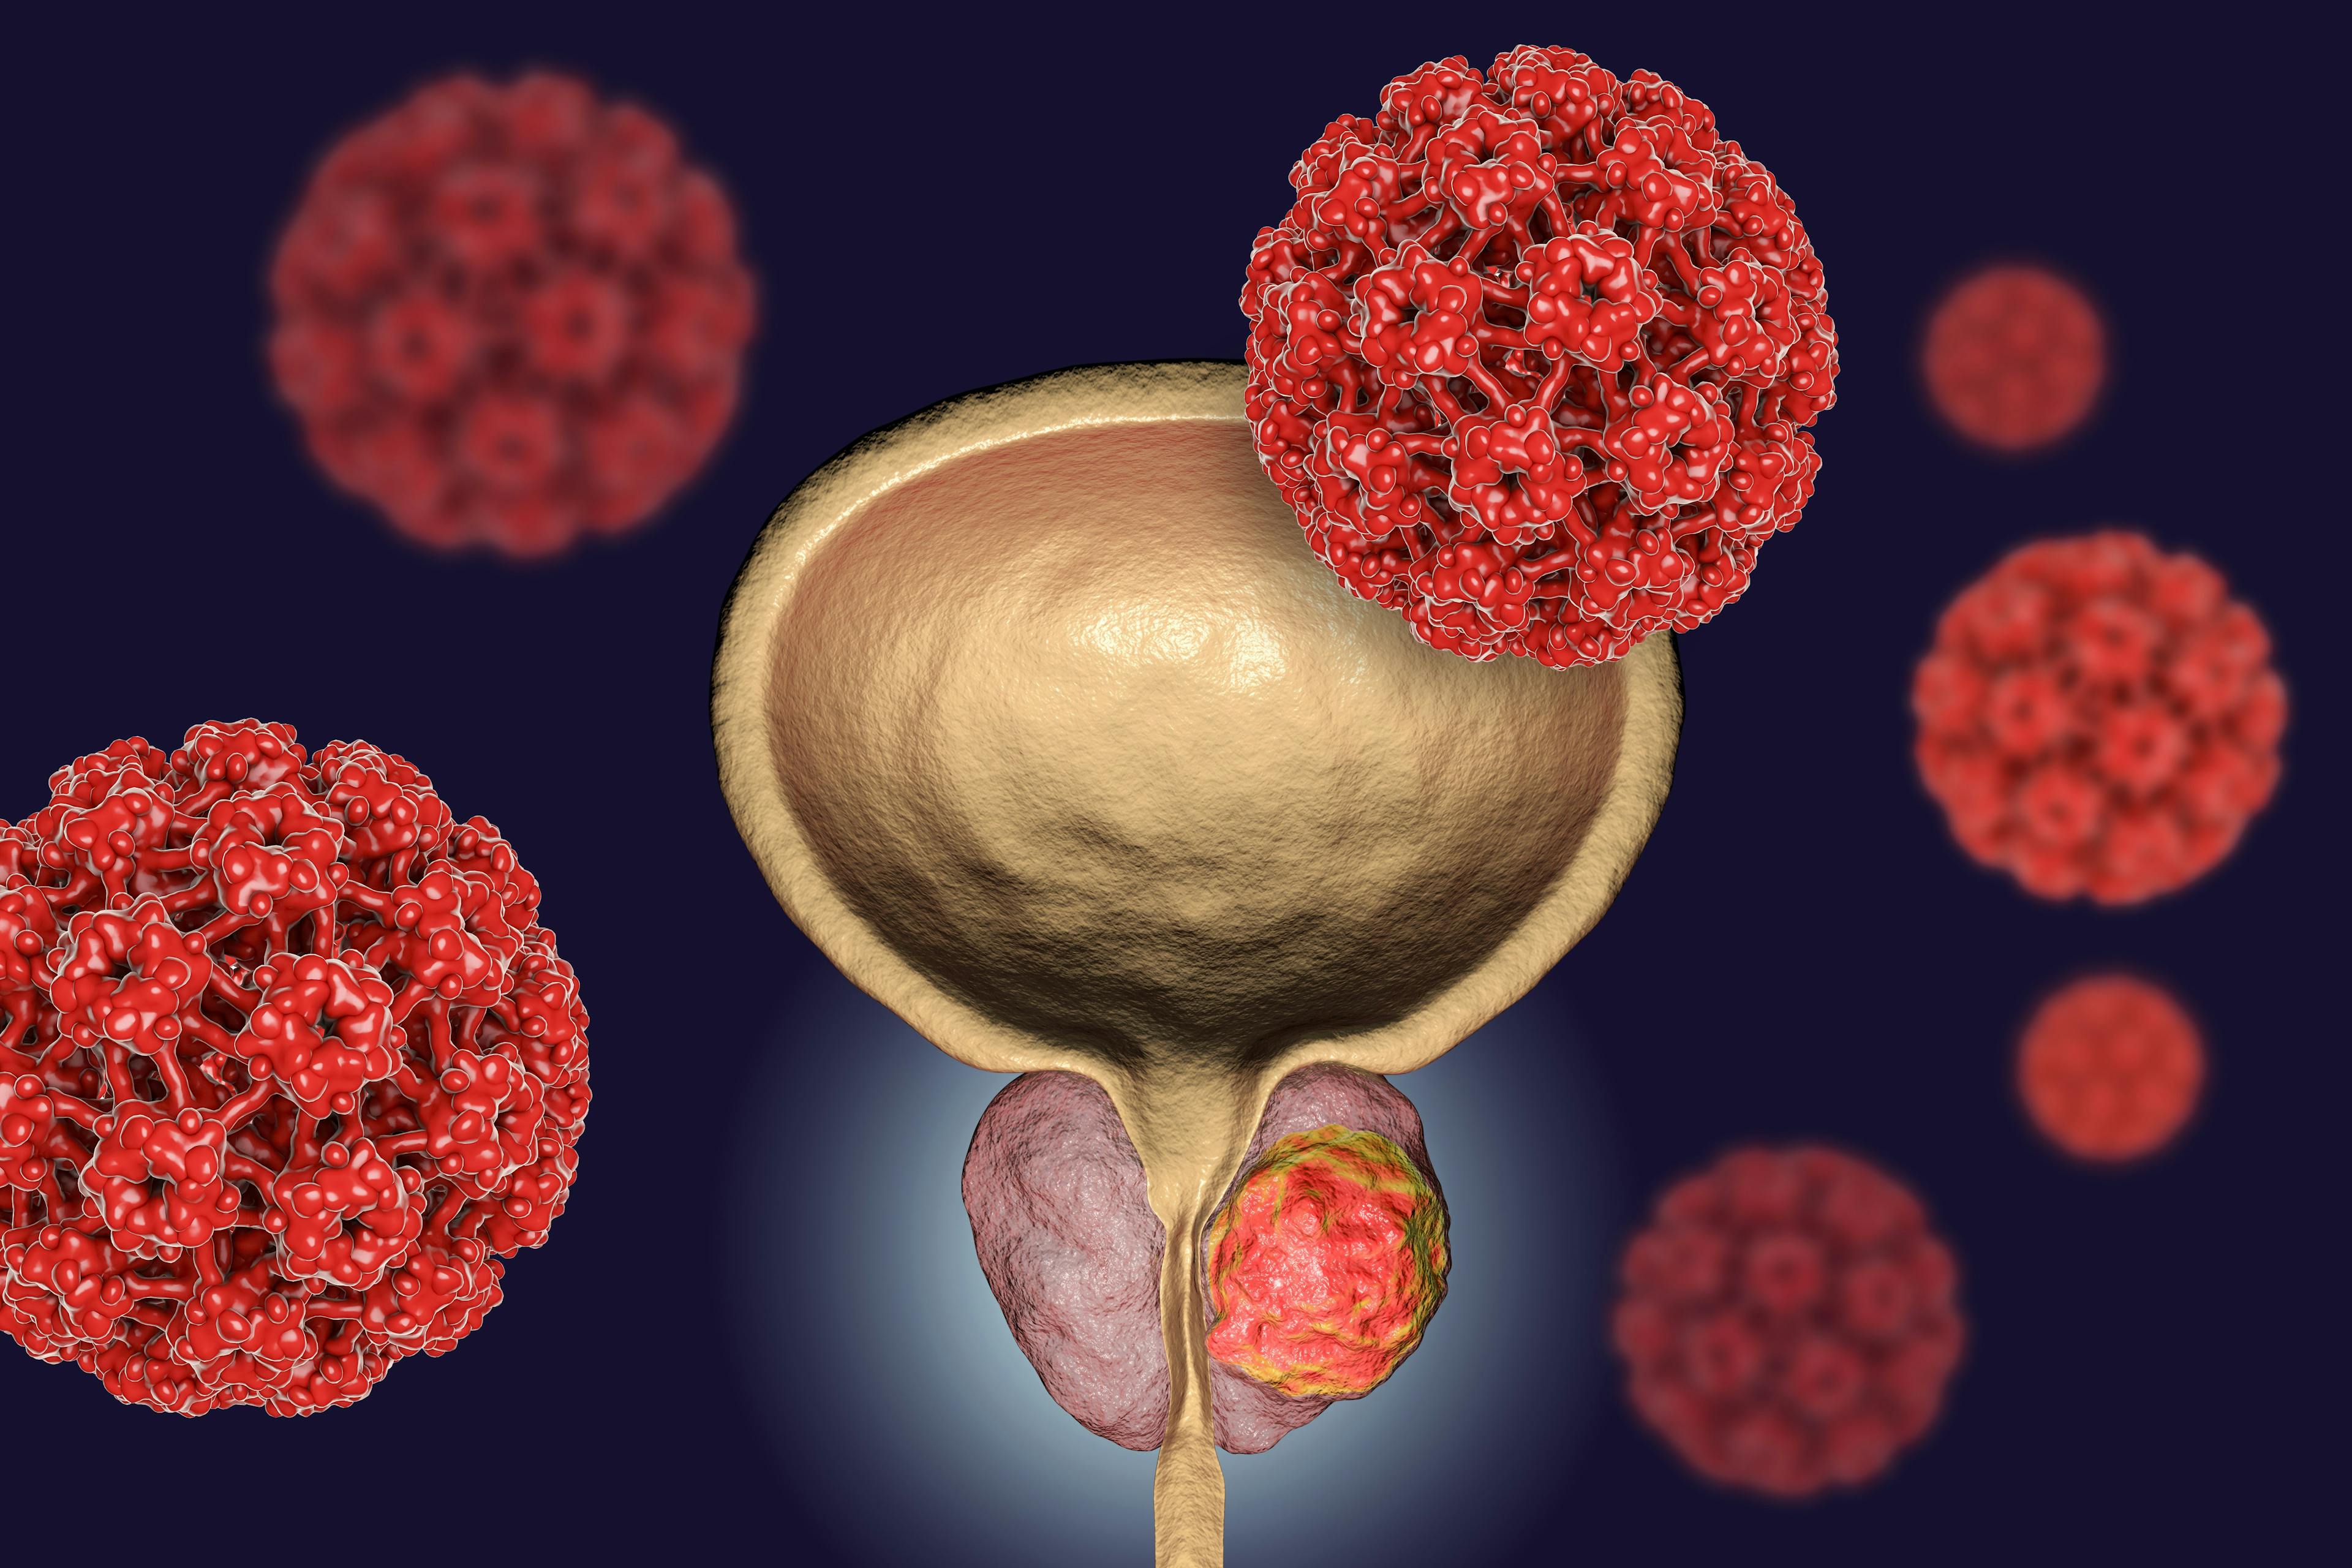 Illustration of a human prostate with a tumor